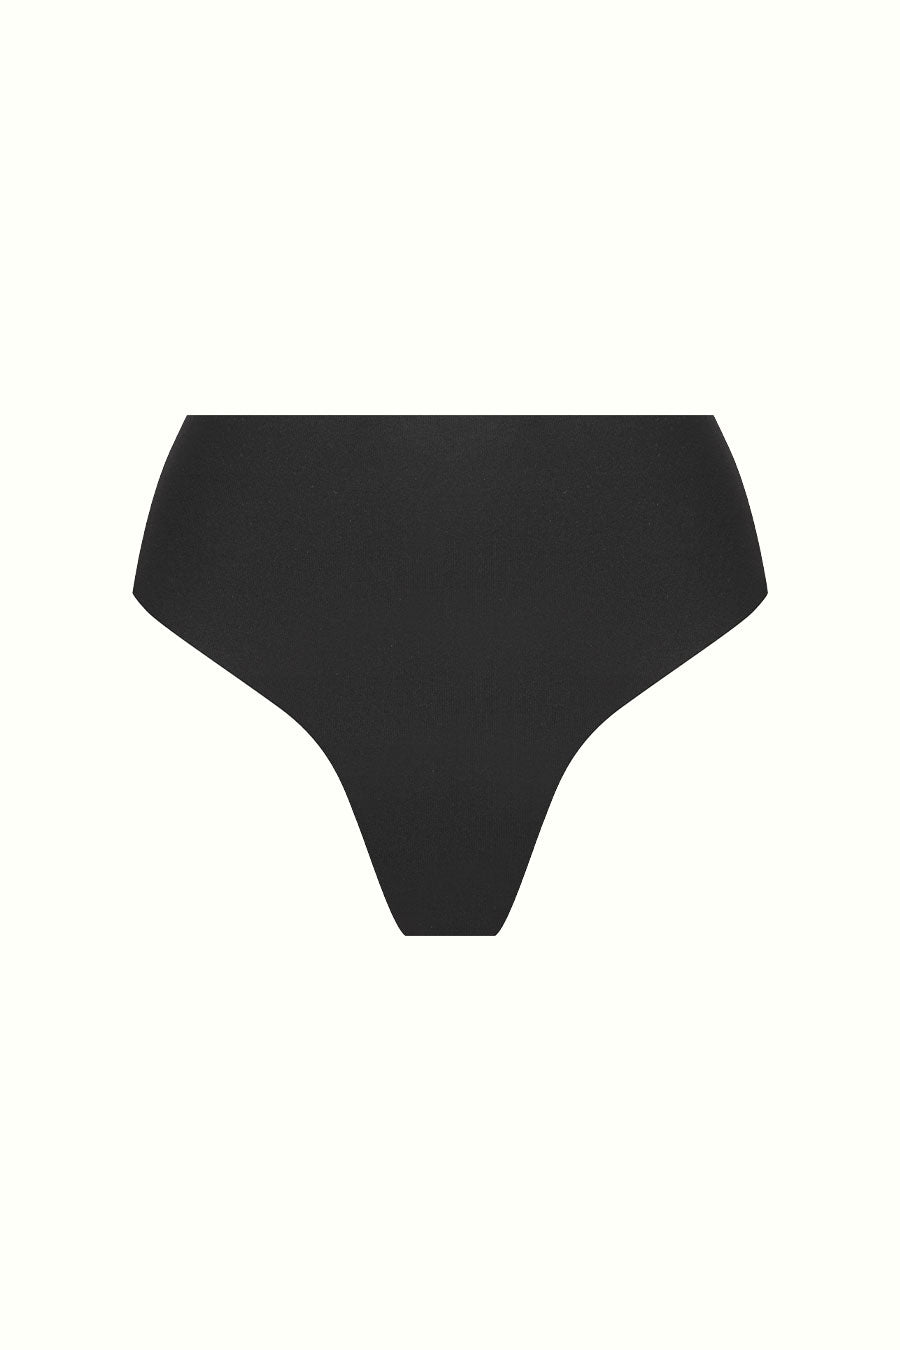 No-Show Support G-String - Black